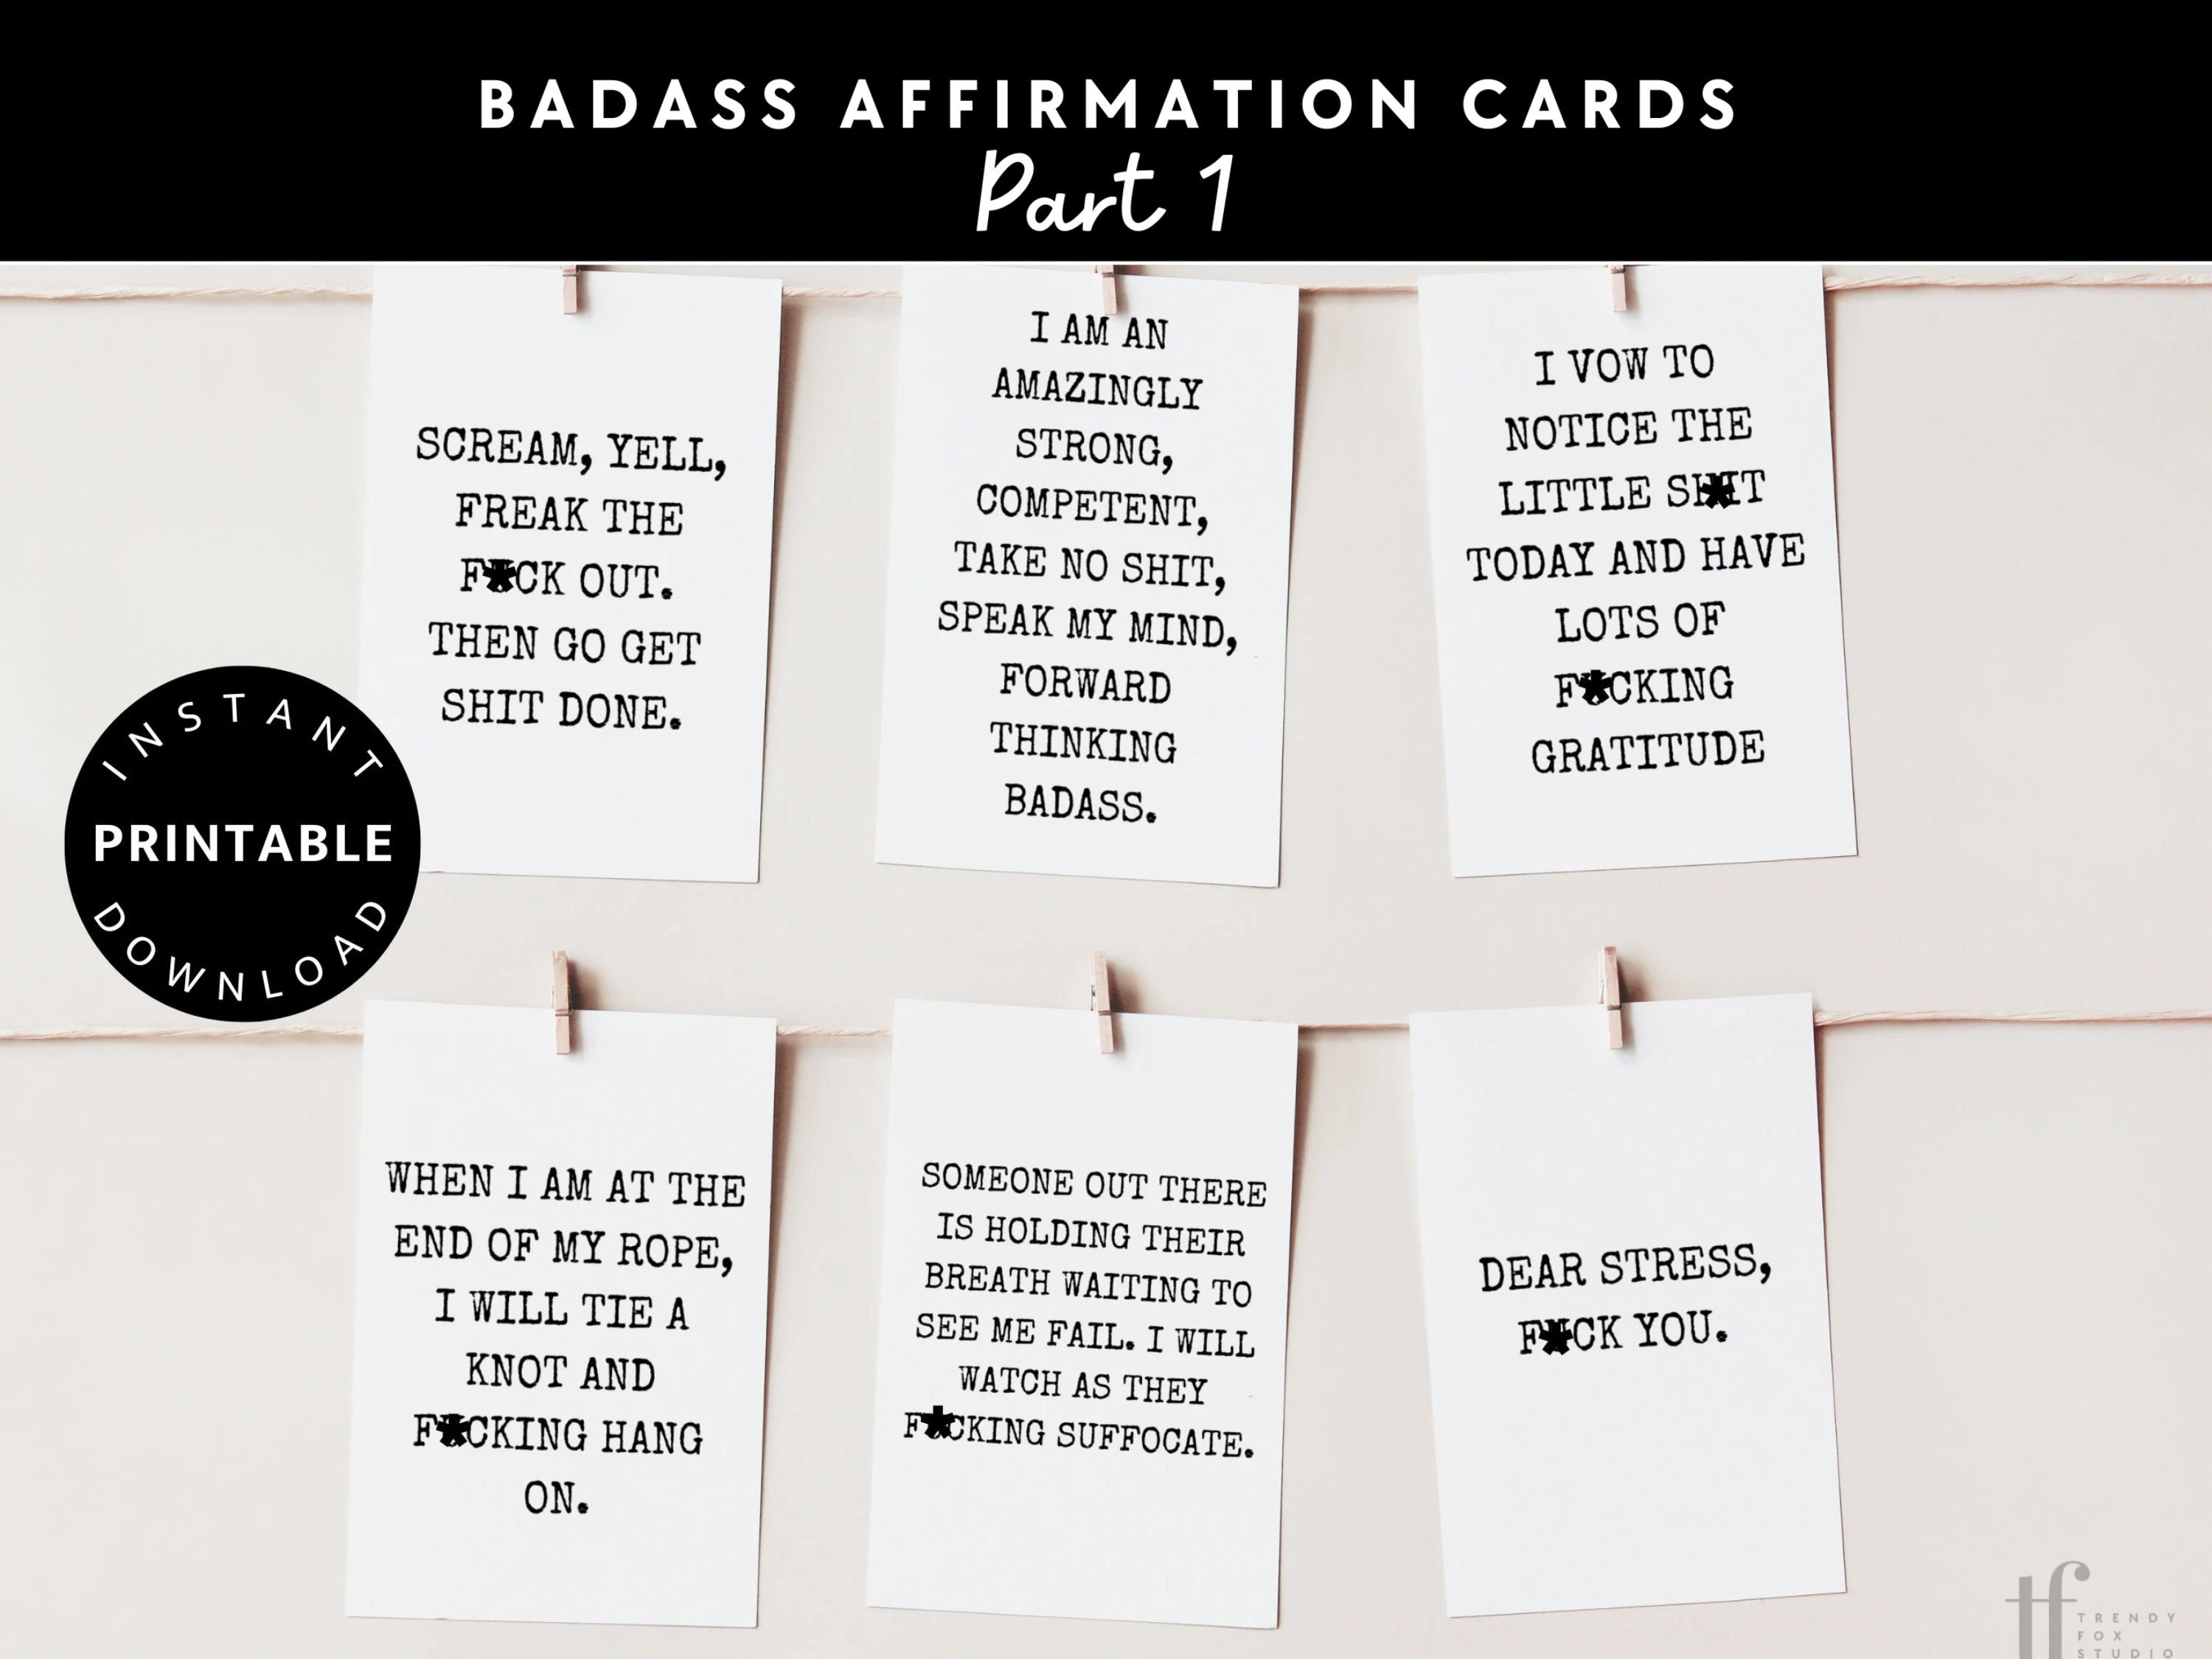 Printable Badass Affirmation Cards Sweary Affirmation Deck pic pic